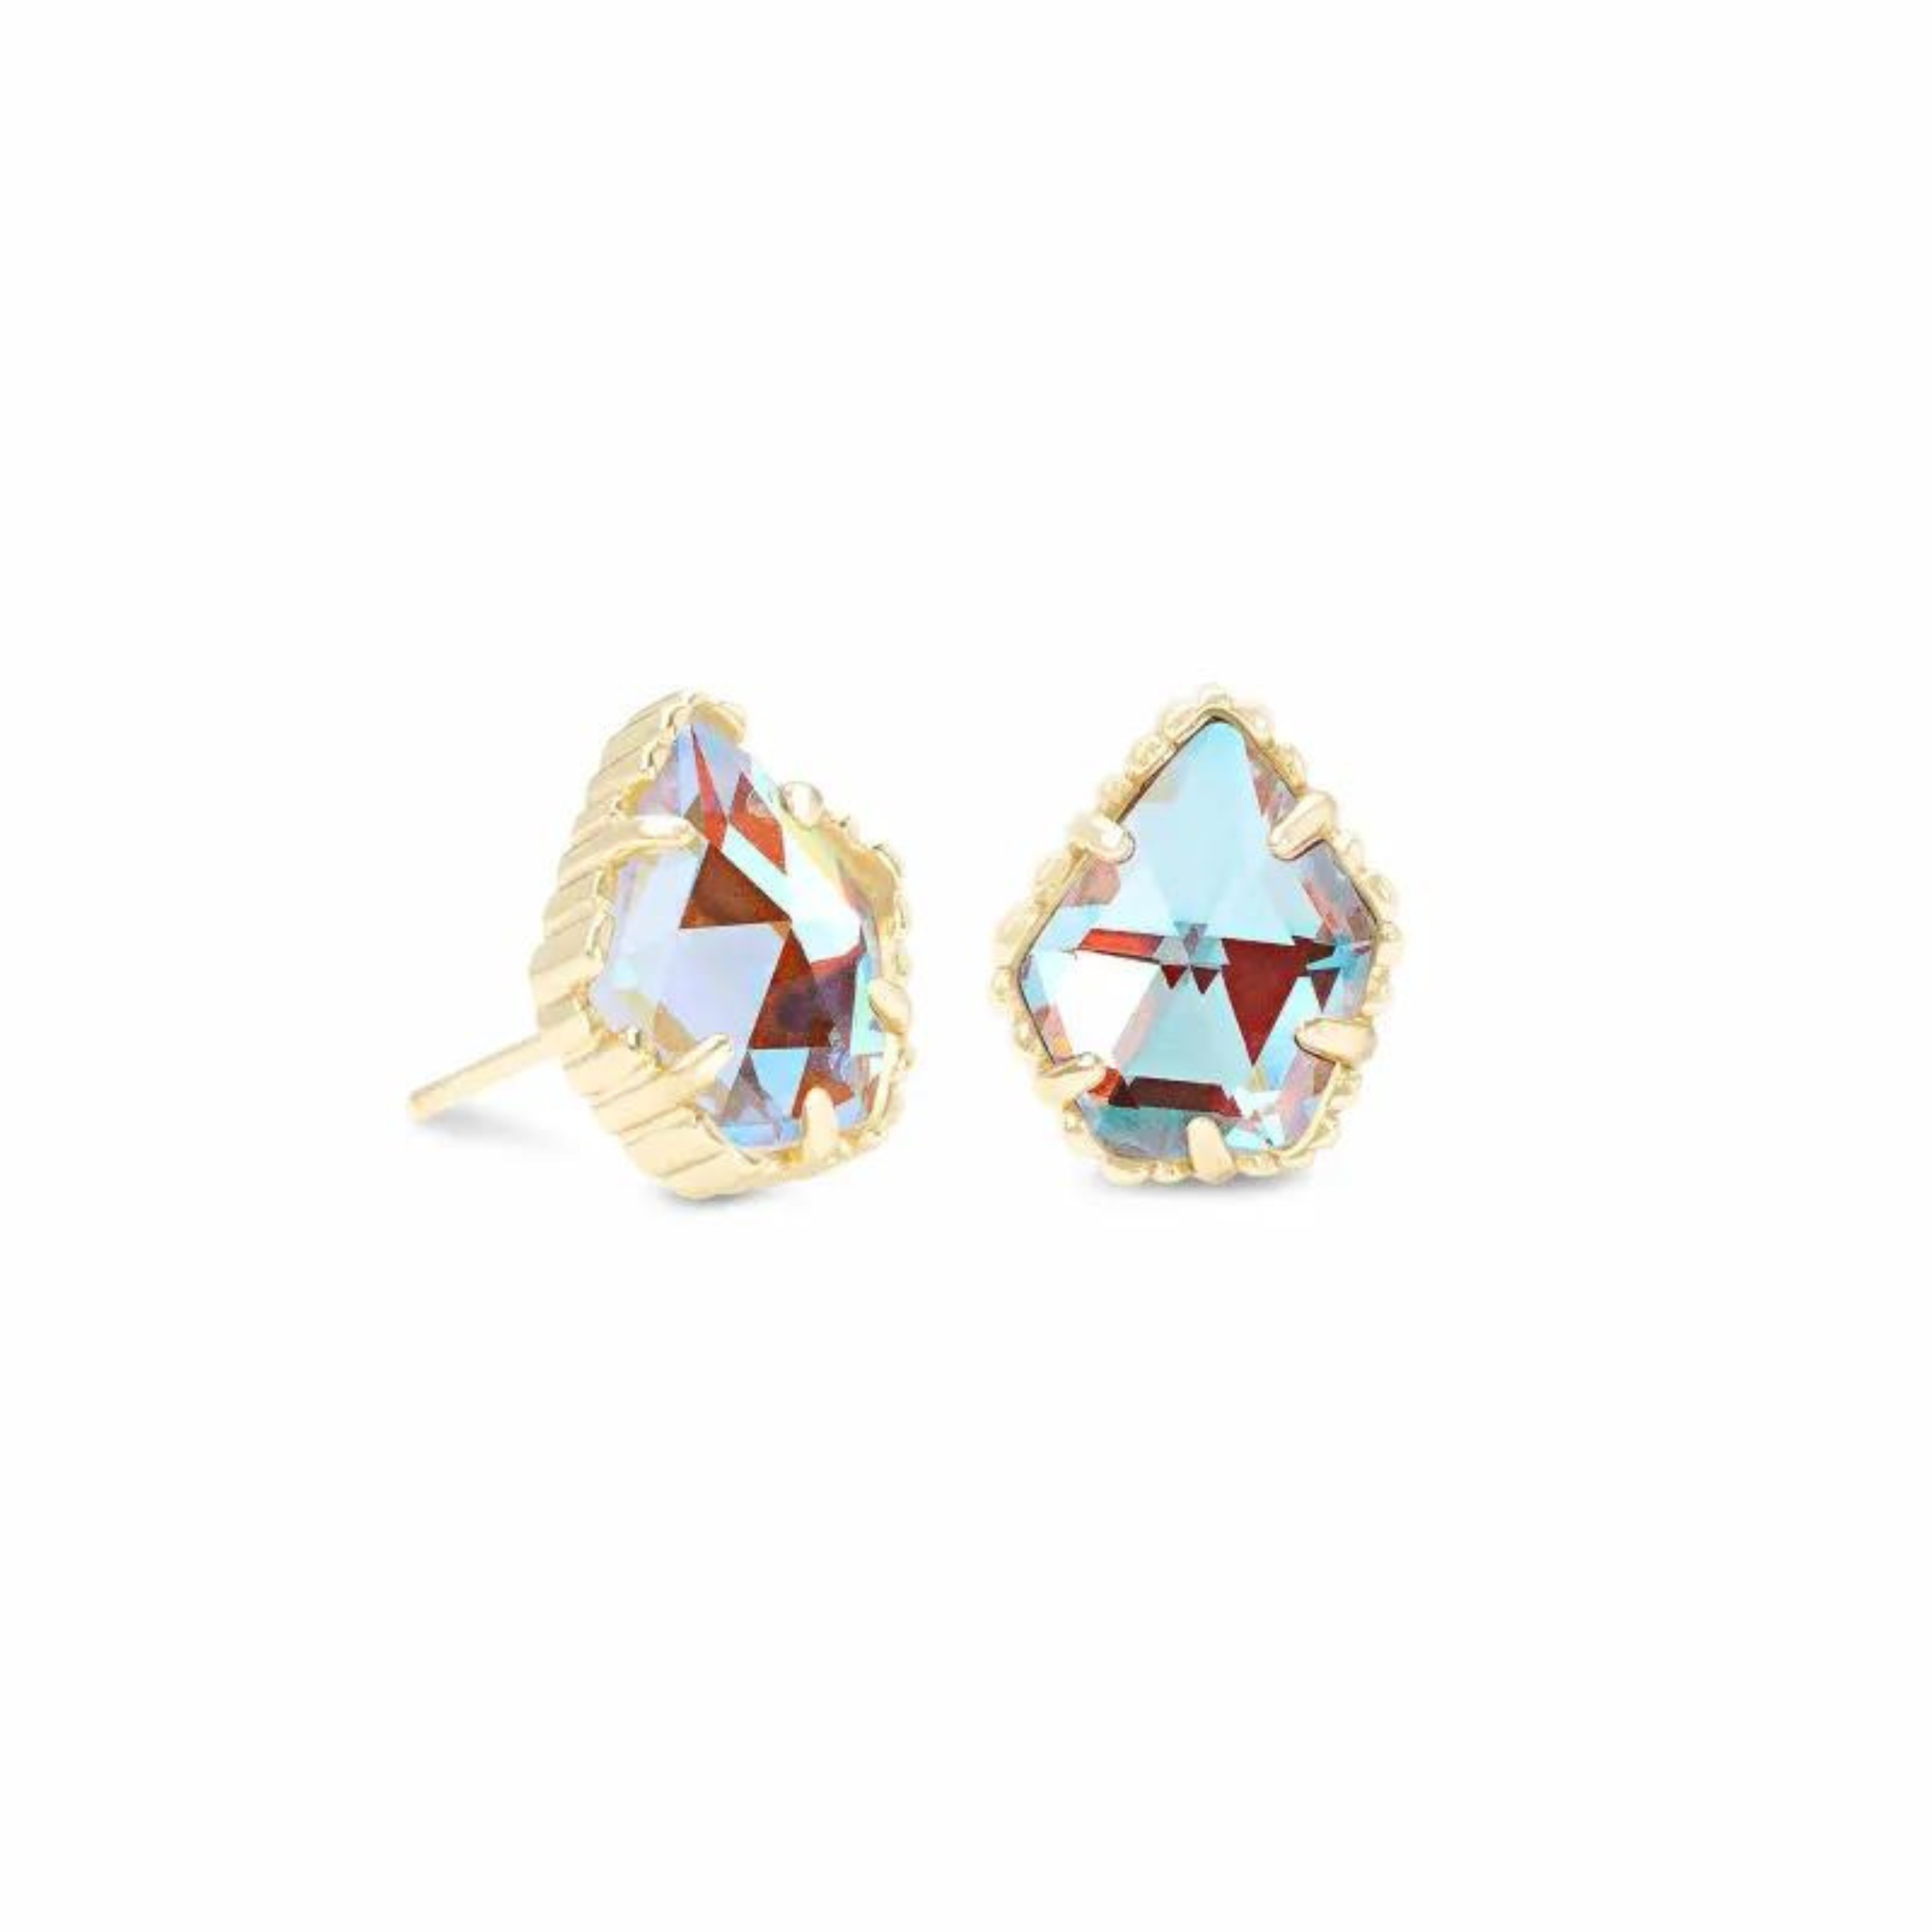 Gold stud earrings with dichroic glass in the center, pictured on a white background.